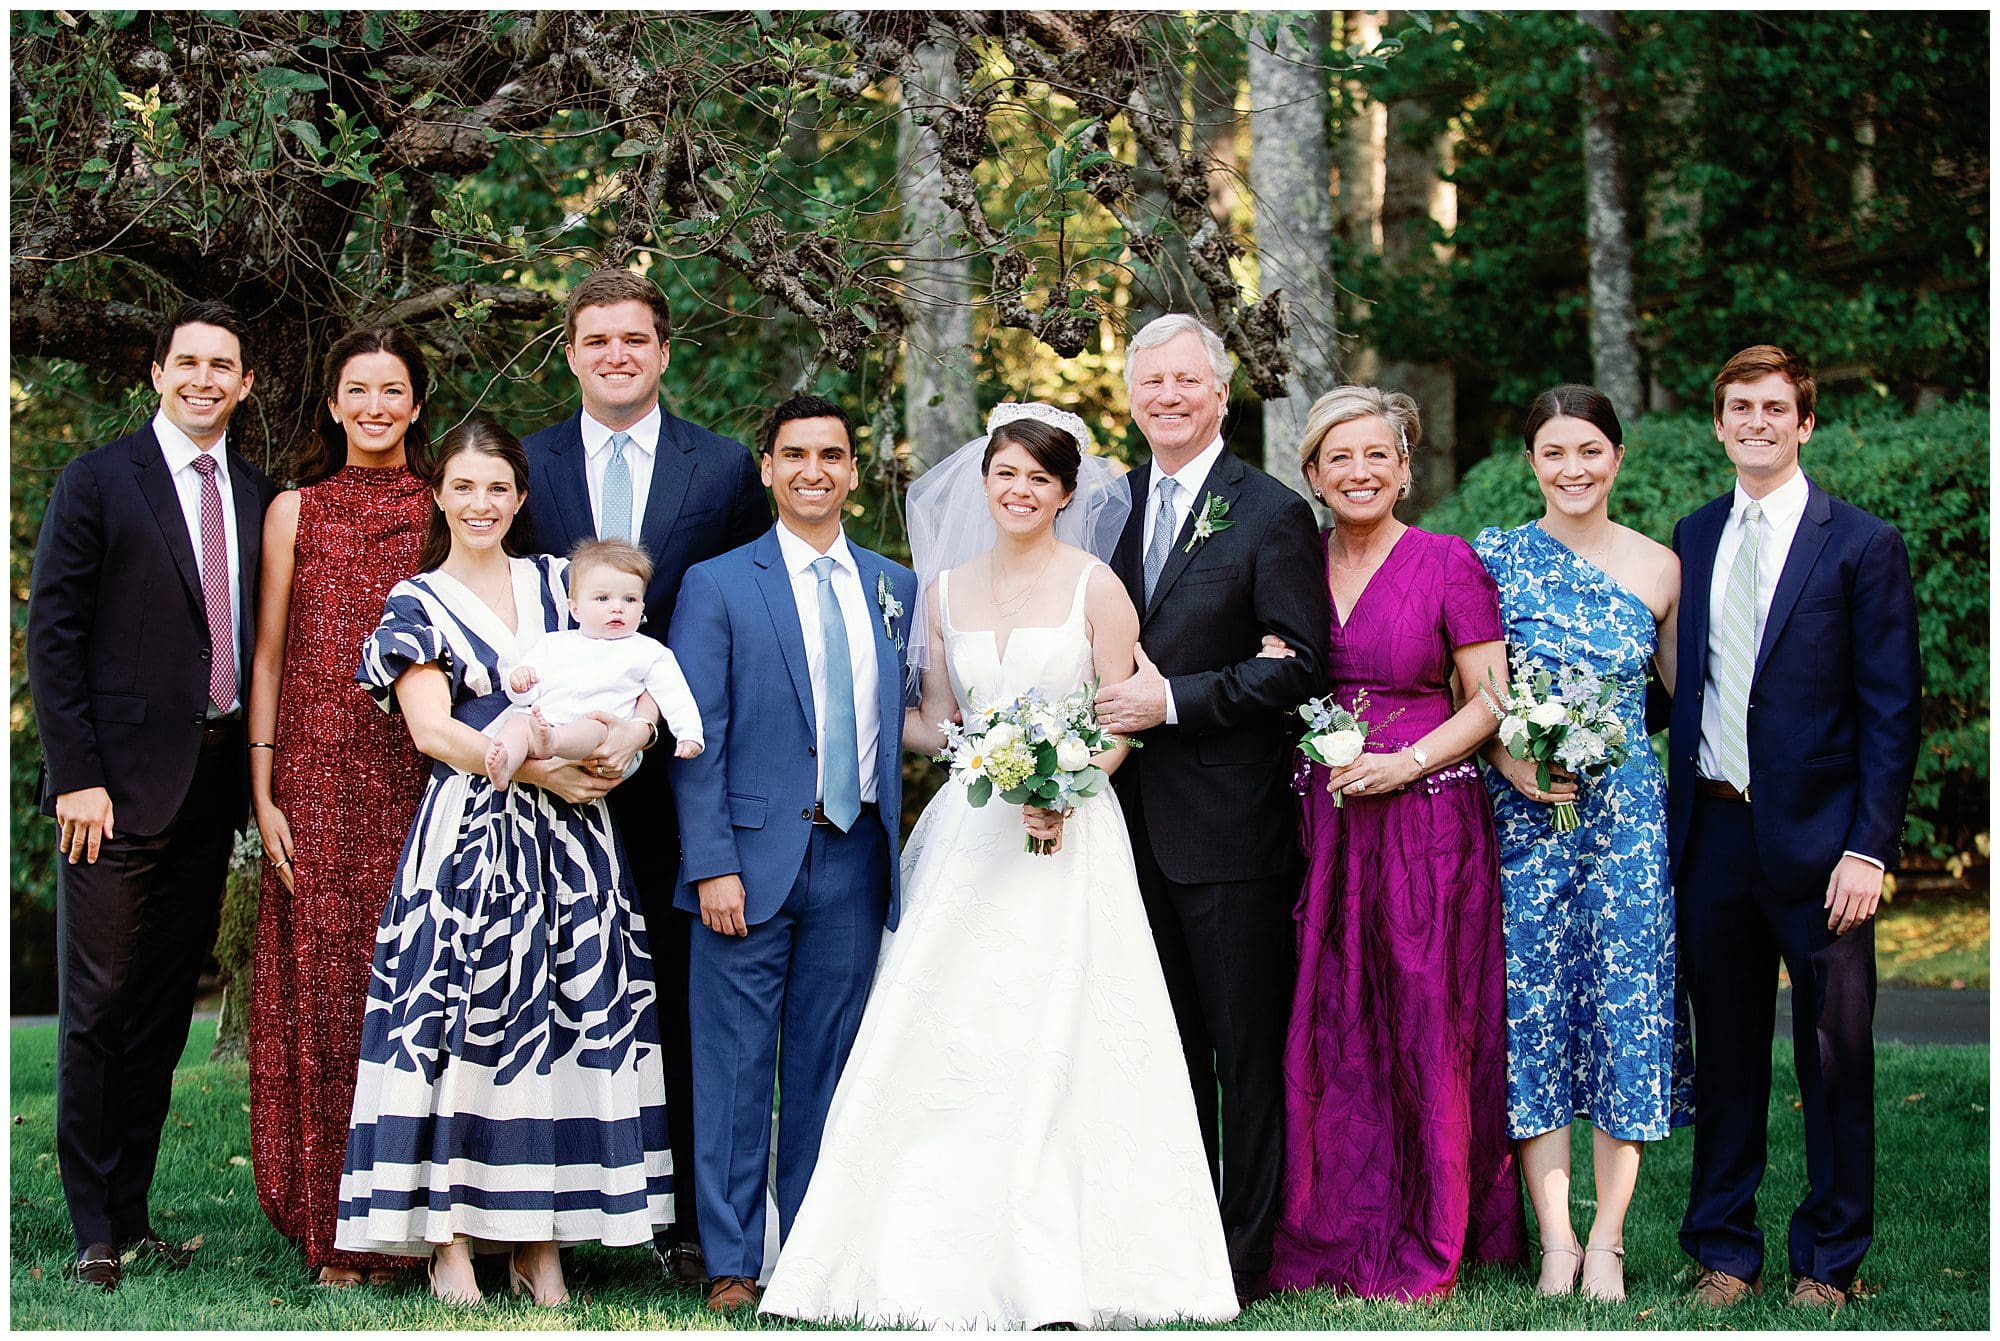 A wedding party posing for a photo.